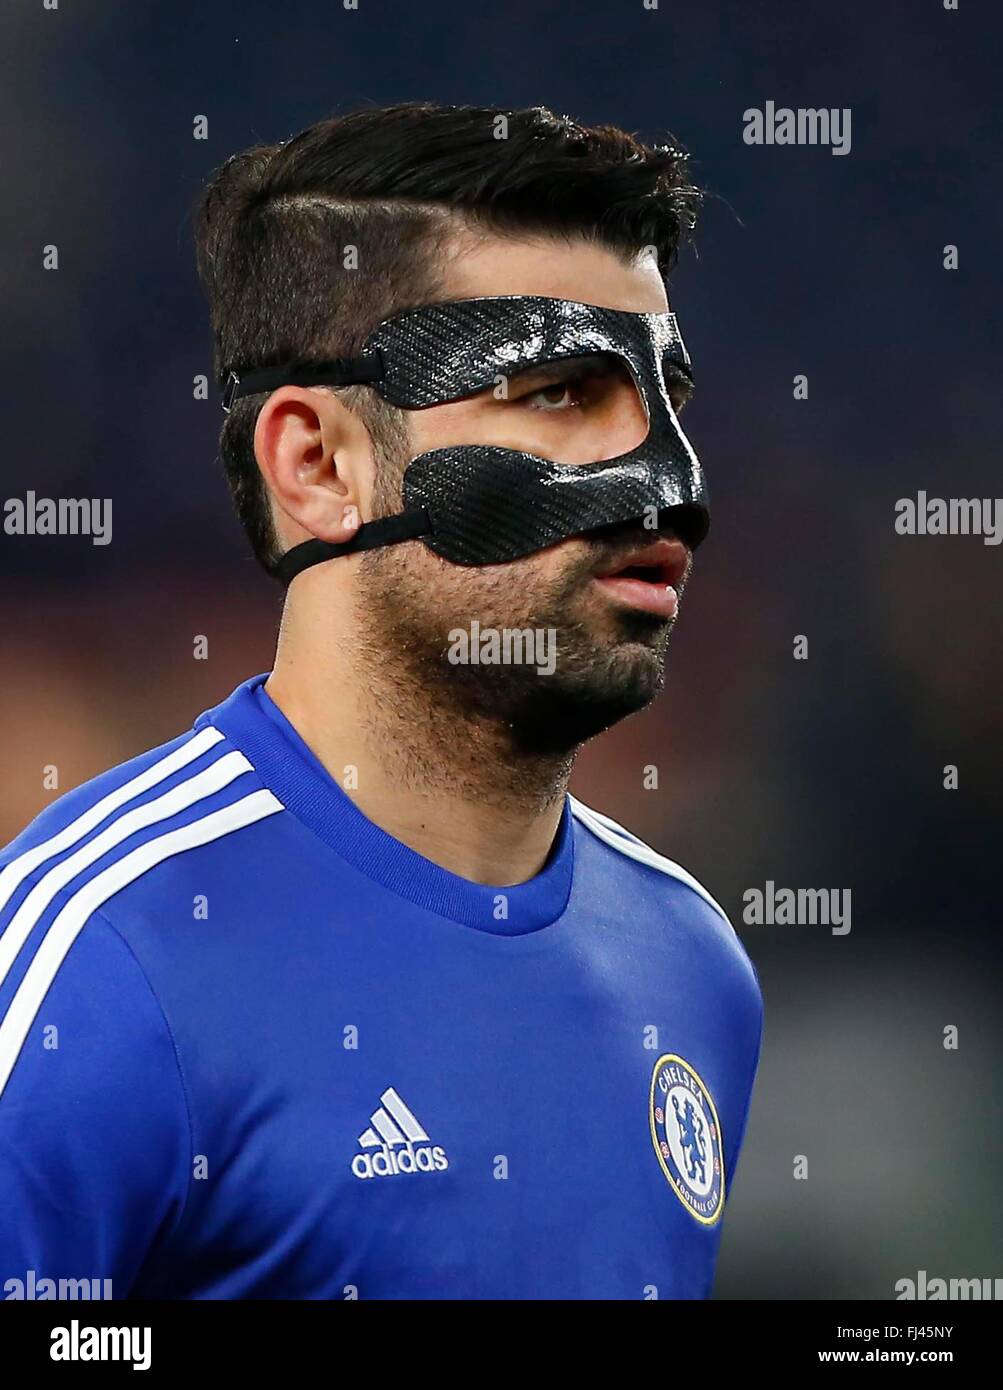 Chelsea’s Diego Costa seen during the UEFA Champions League round of 16 match between Paris Saint-Germain and Chelsea at the Parc des Princes Stadium in Paris. February 16, 2016. James Boardman / Telephoto Images +44 7967 642437 Stock Photo